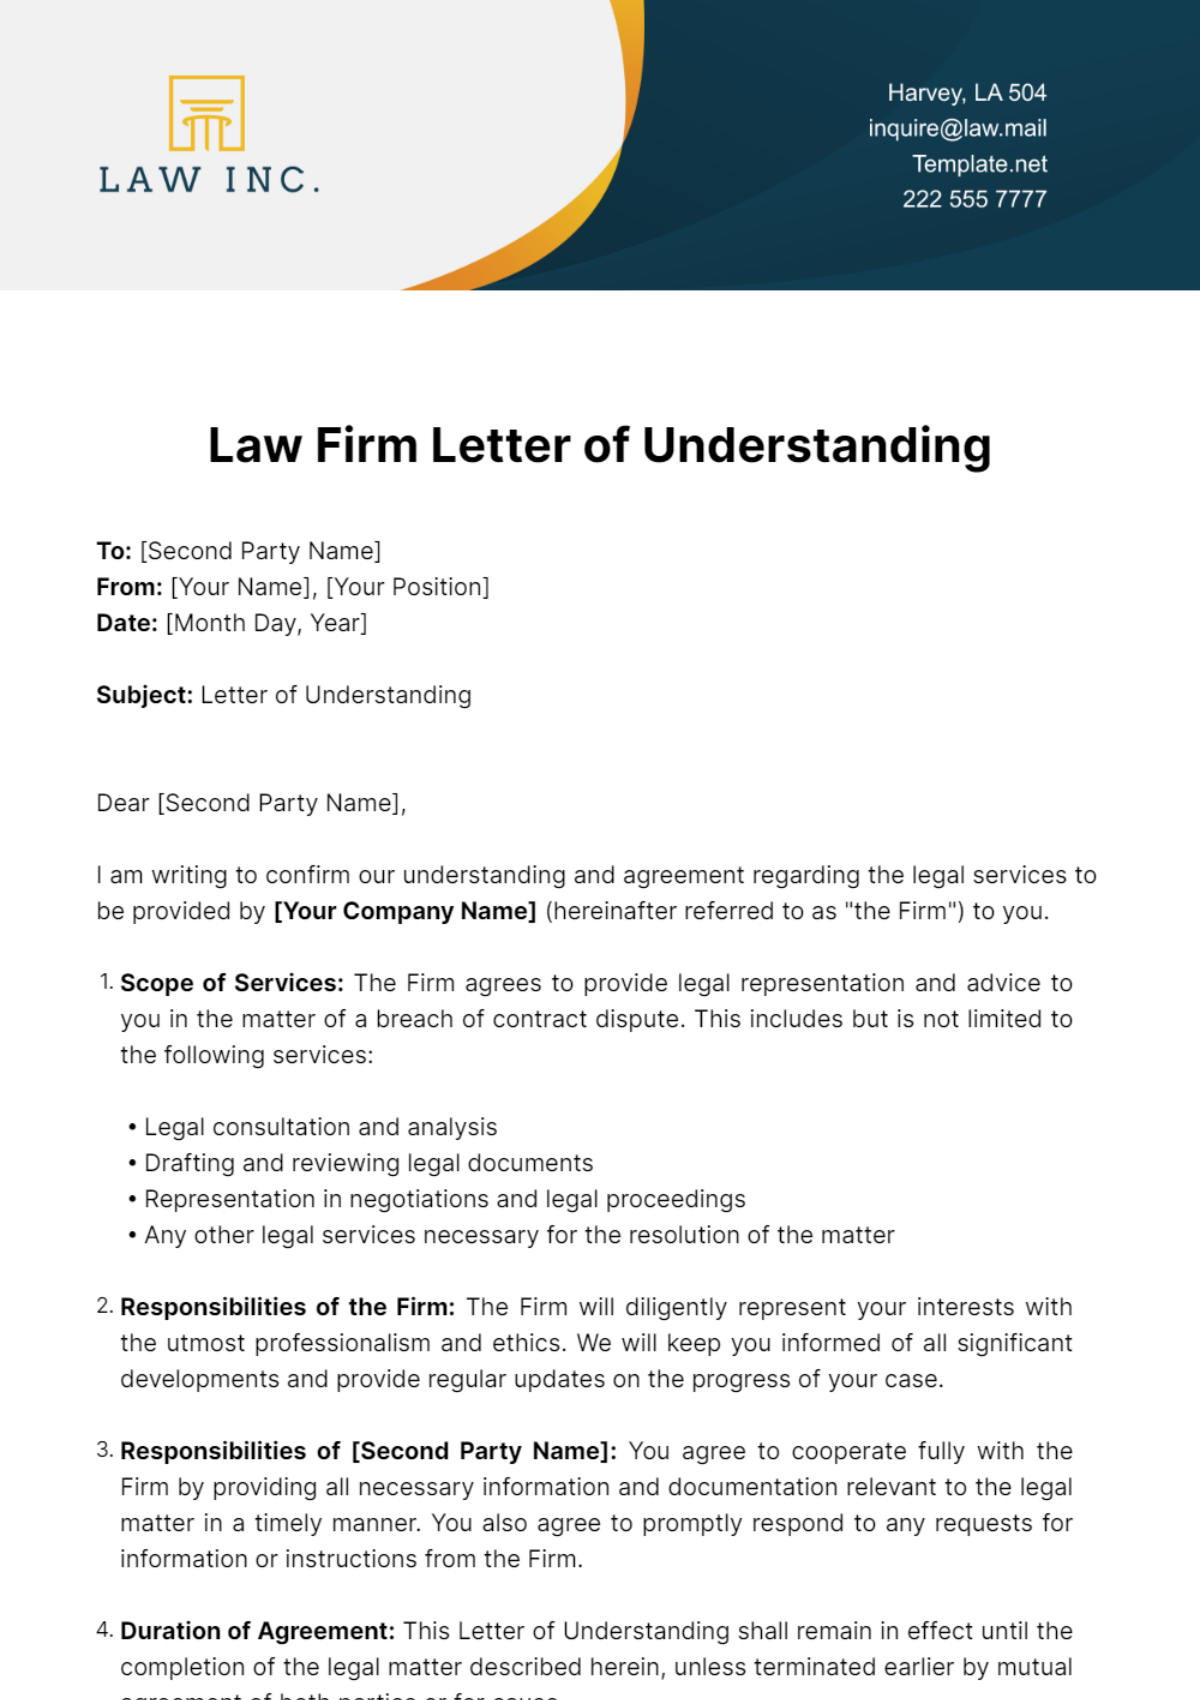 Law Firm Letter of Understanding Template